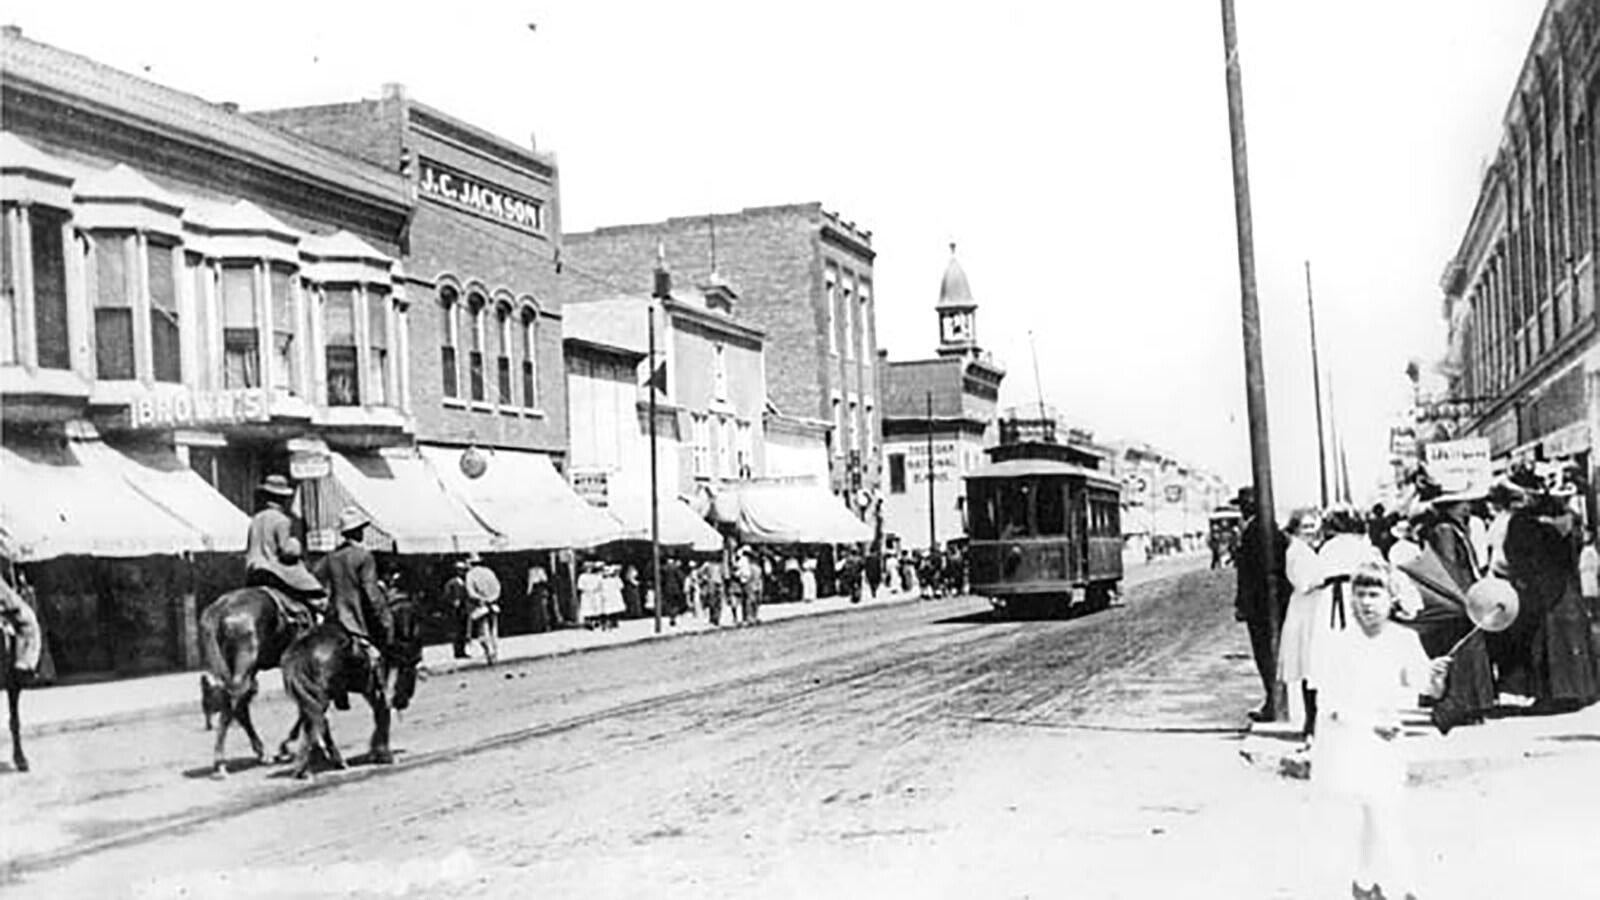 An electric trolley car in downtown Sheridan in the early 1910s.